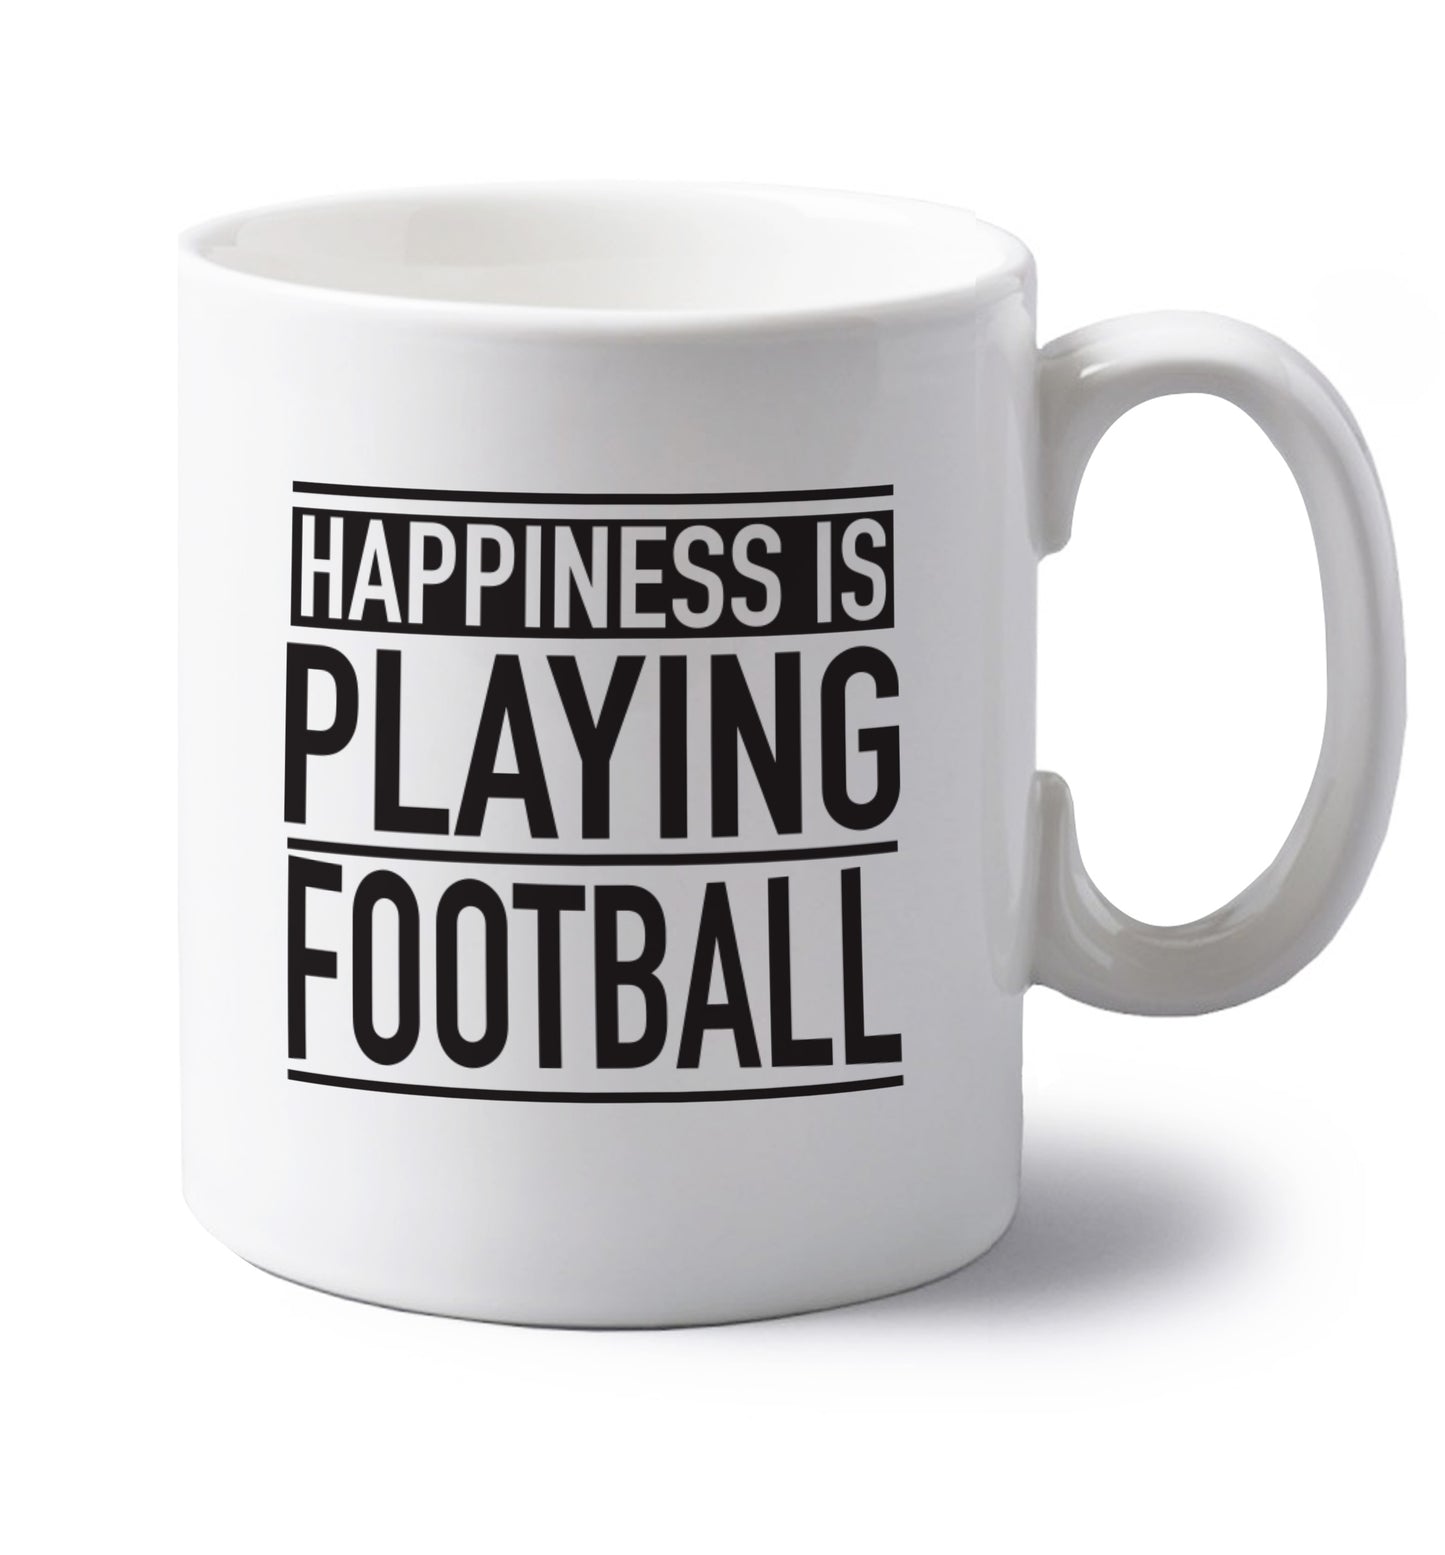 Happiness is playing football left handed white ceramic mug 